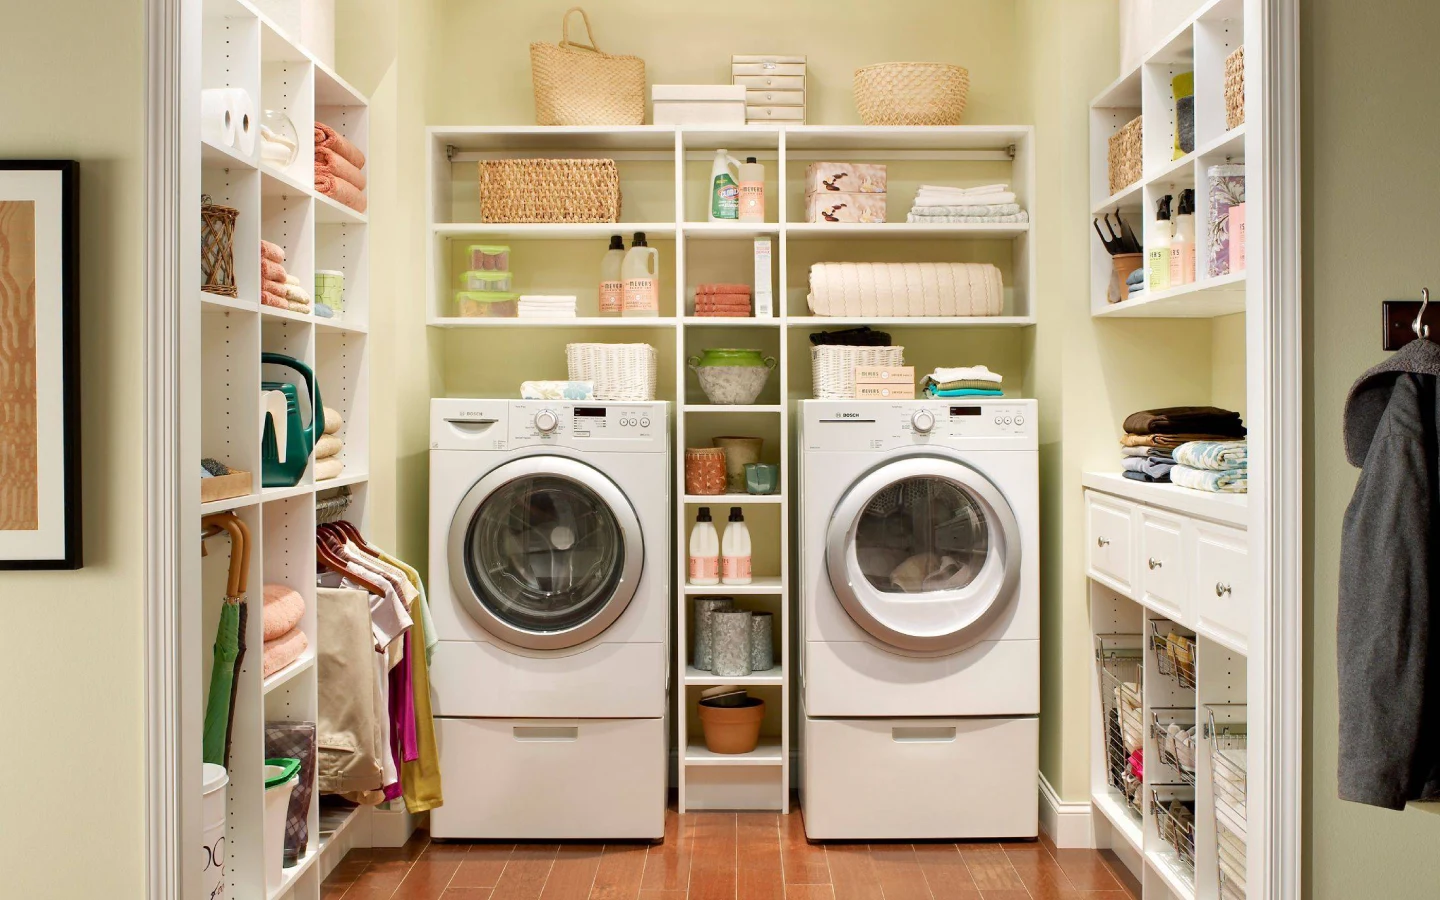 Tips to create an ADHD-friendly laundry room